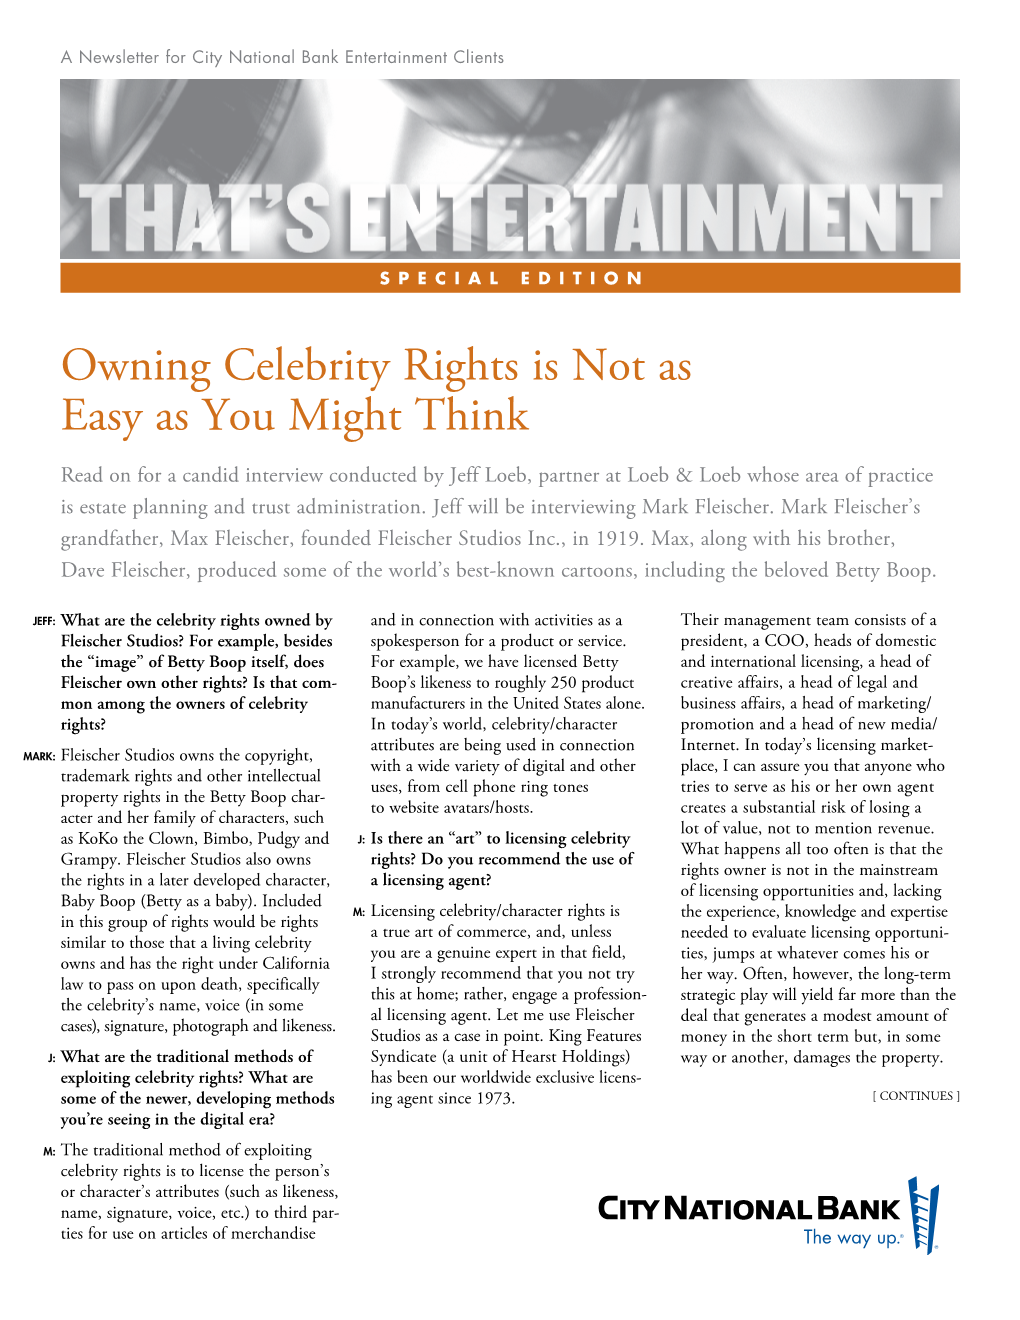 Owning Celebrity Rights Is Not As Easy As You